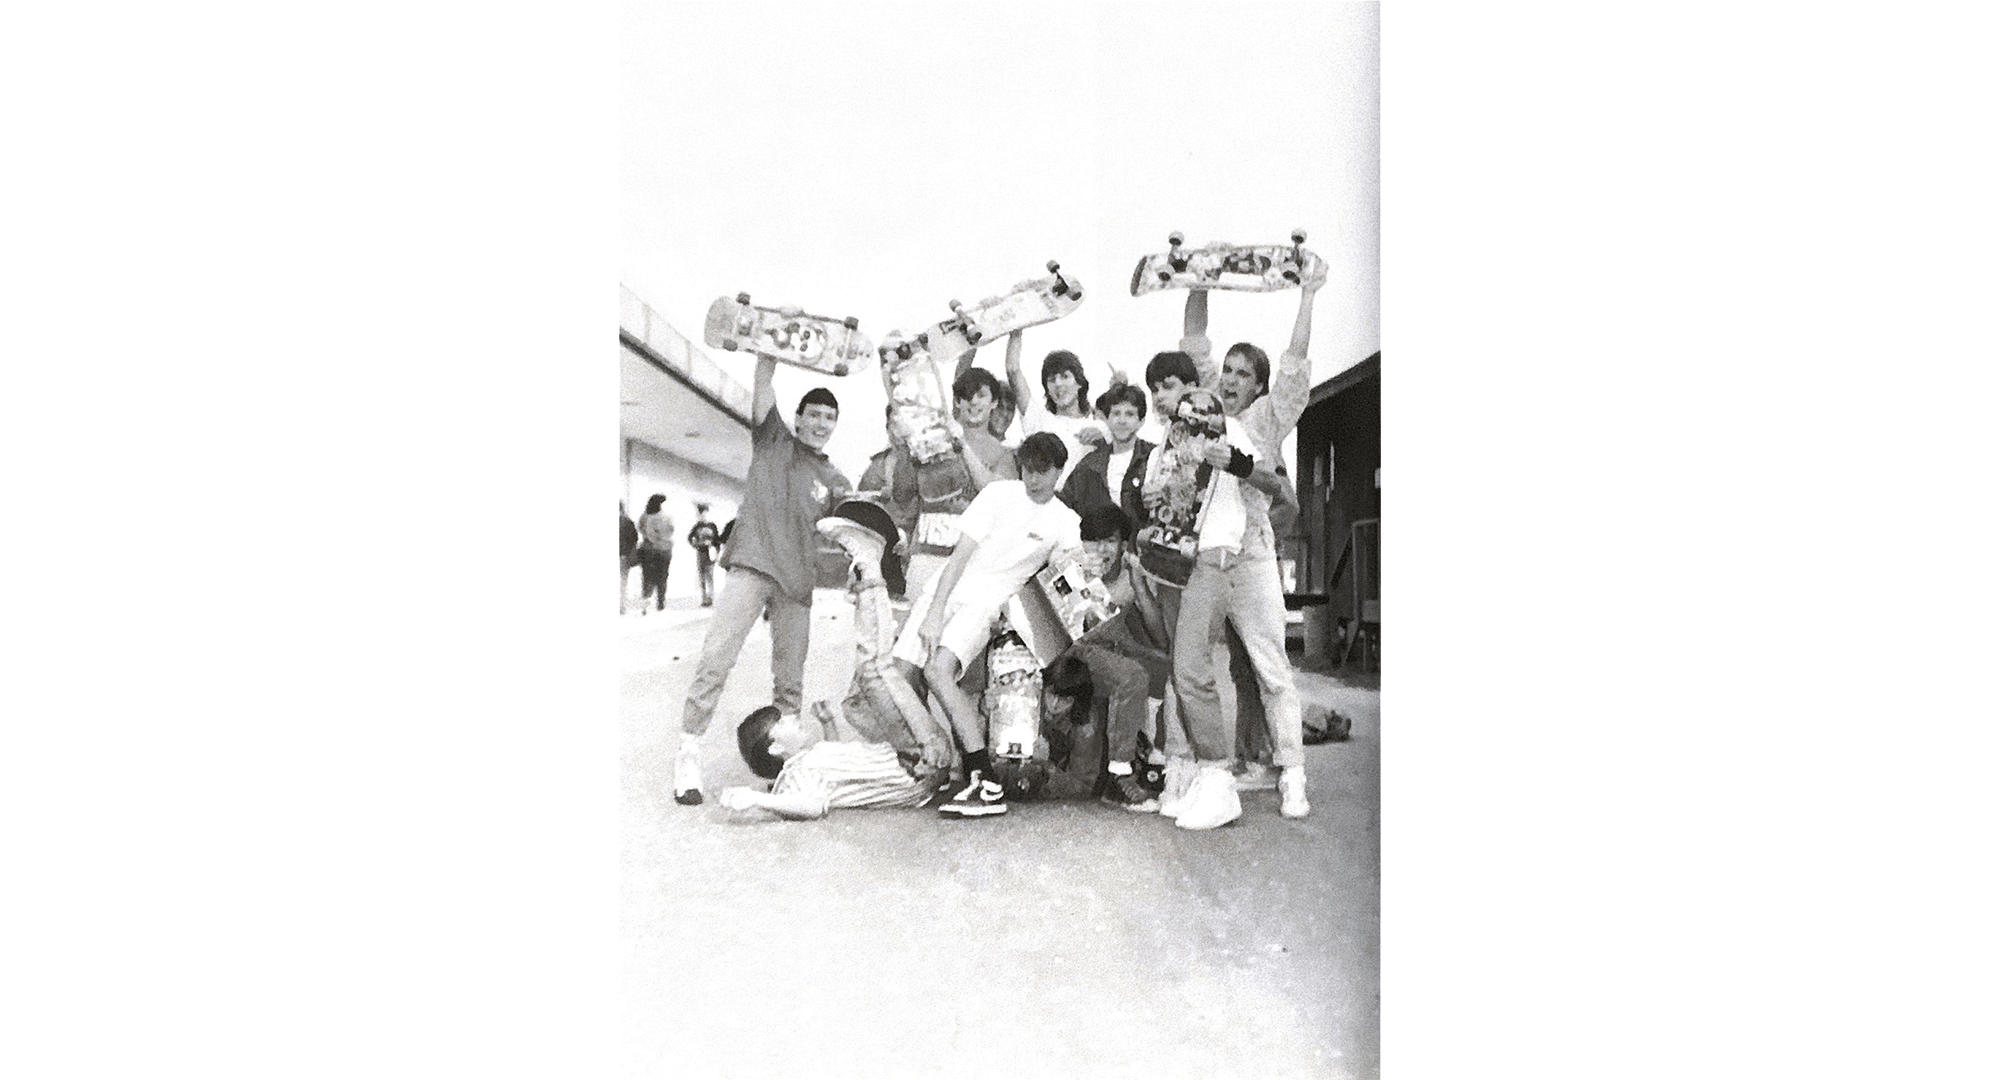 Teenagers at Mosley High School holding skateboards in 1988